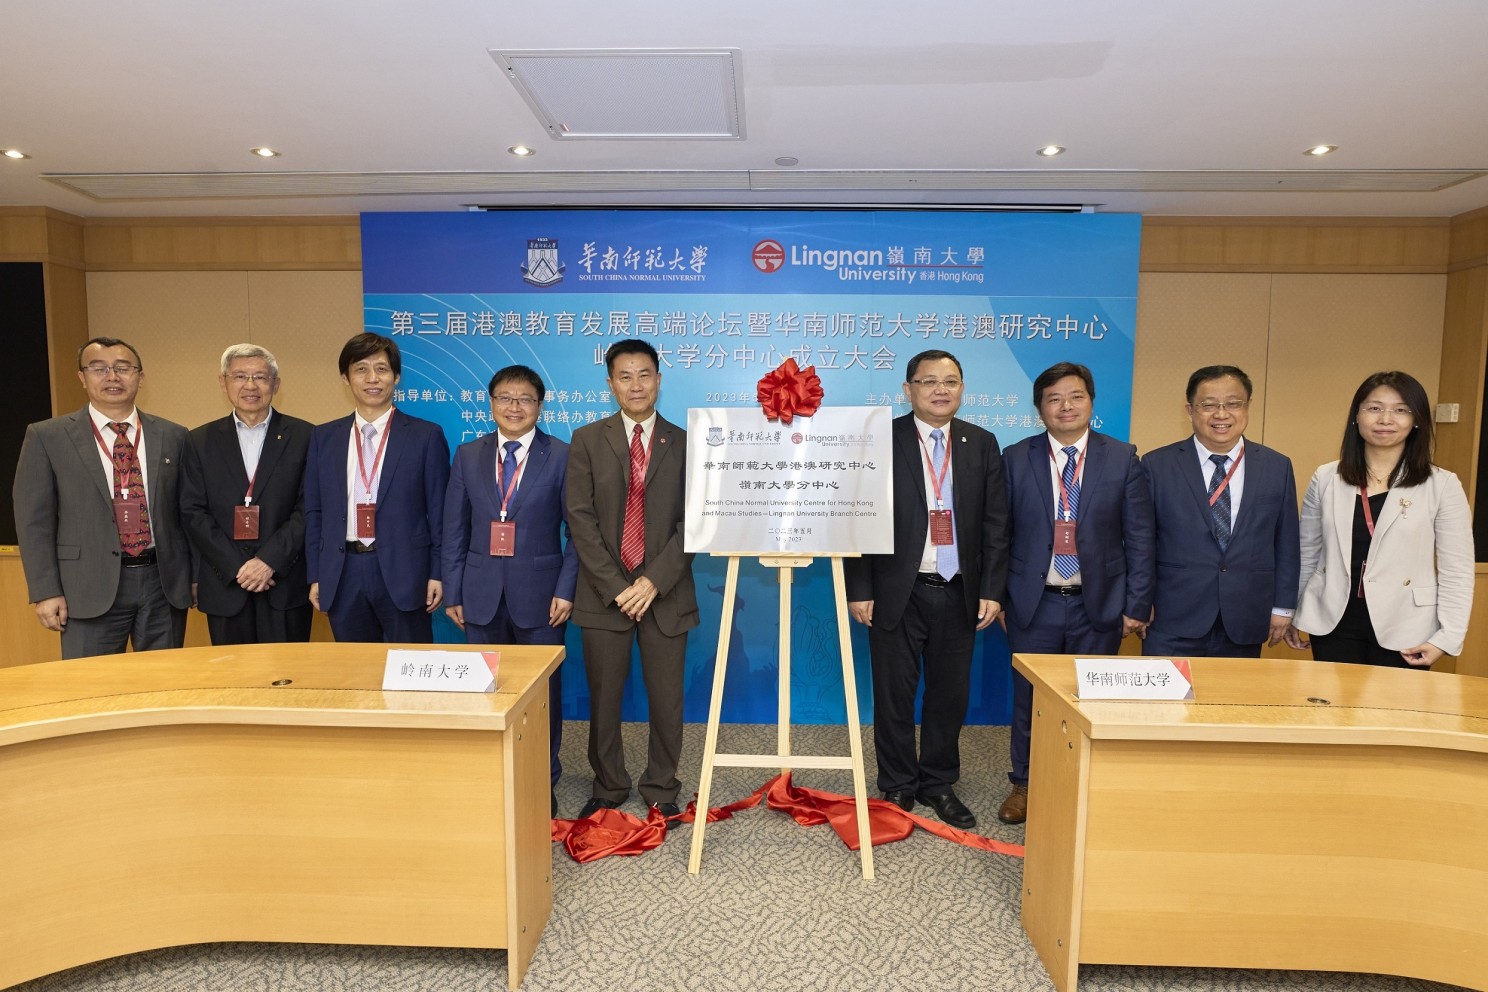 The Third High-Level Forum on the Education Development in Hong Kong and Macau and Inauguration of South China Normal University Centre for Hong Kong and Macau Studies – Lingnan University Branch Centre were successfully held at Lingnan’s Paul S Lam Confe